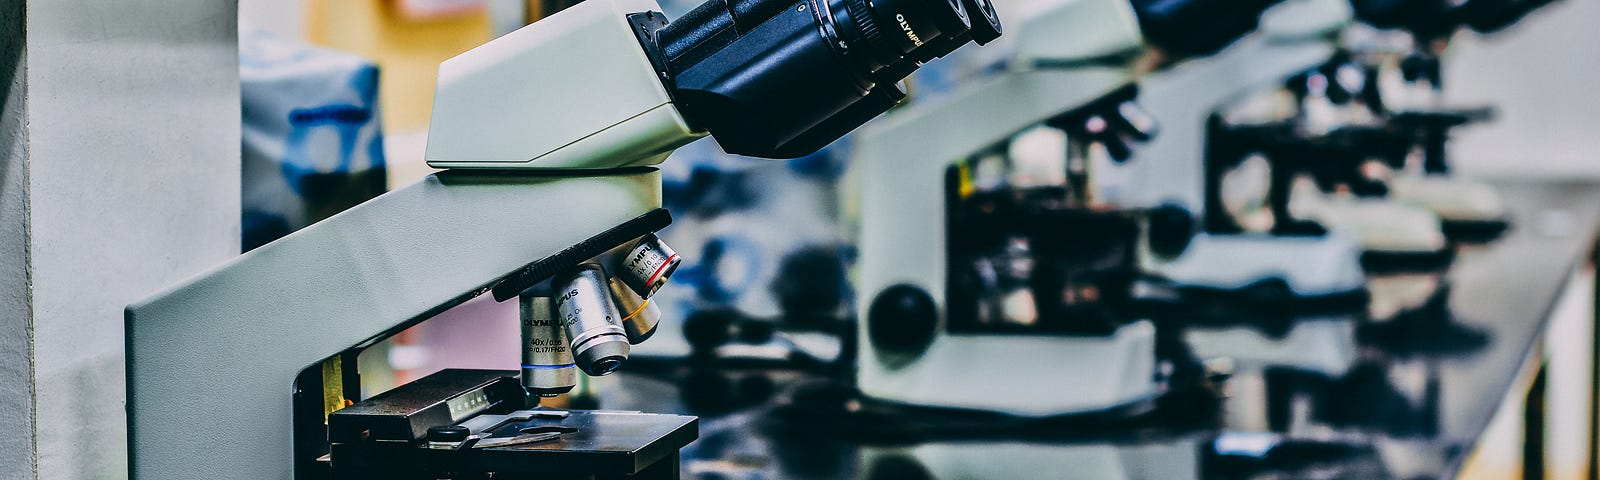 Microscopes in a lab environment